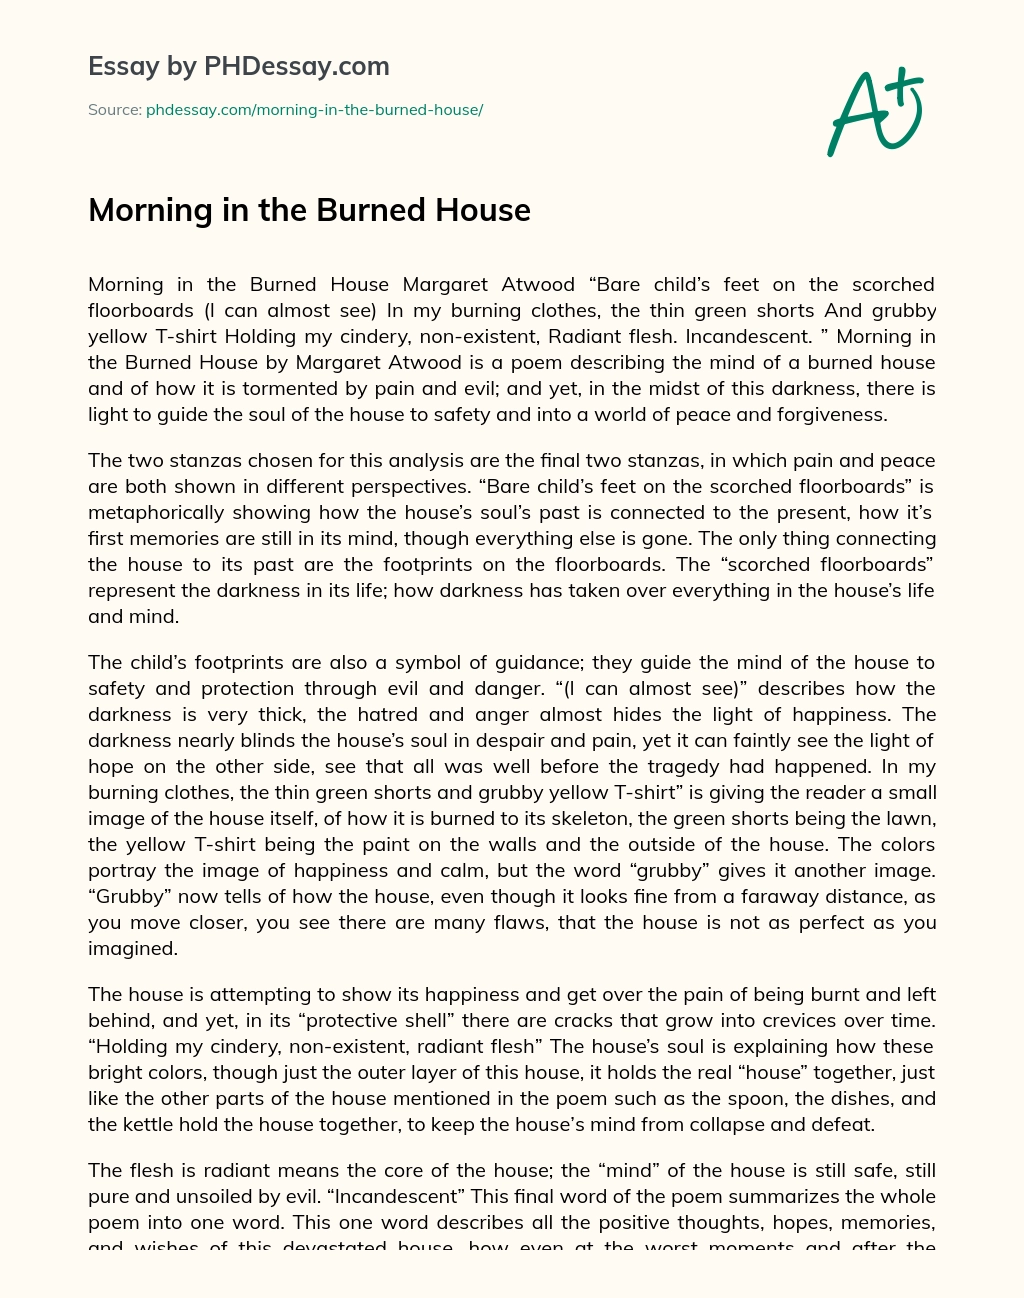 Morning in the Burned House essay